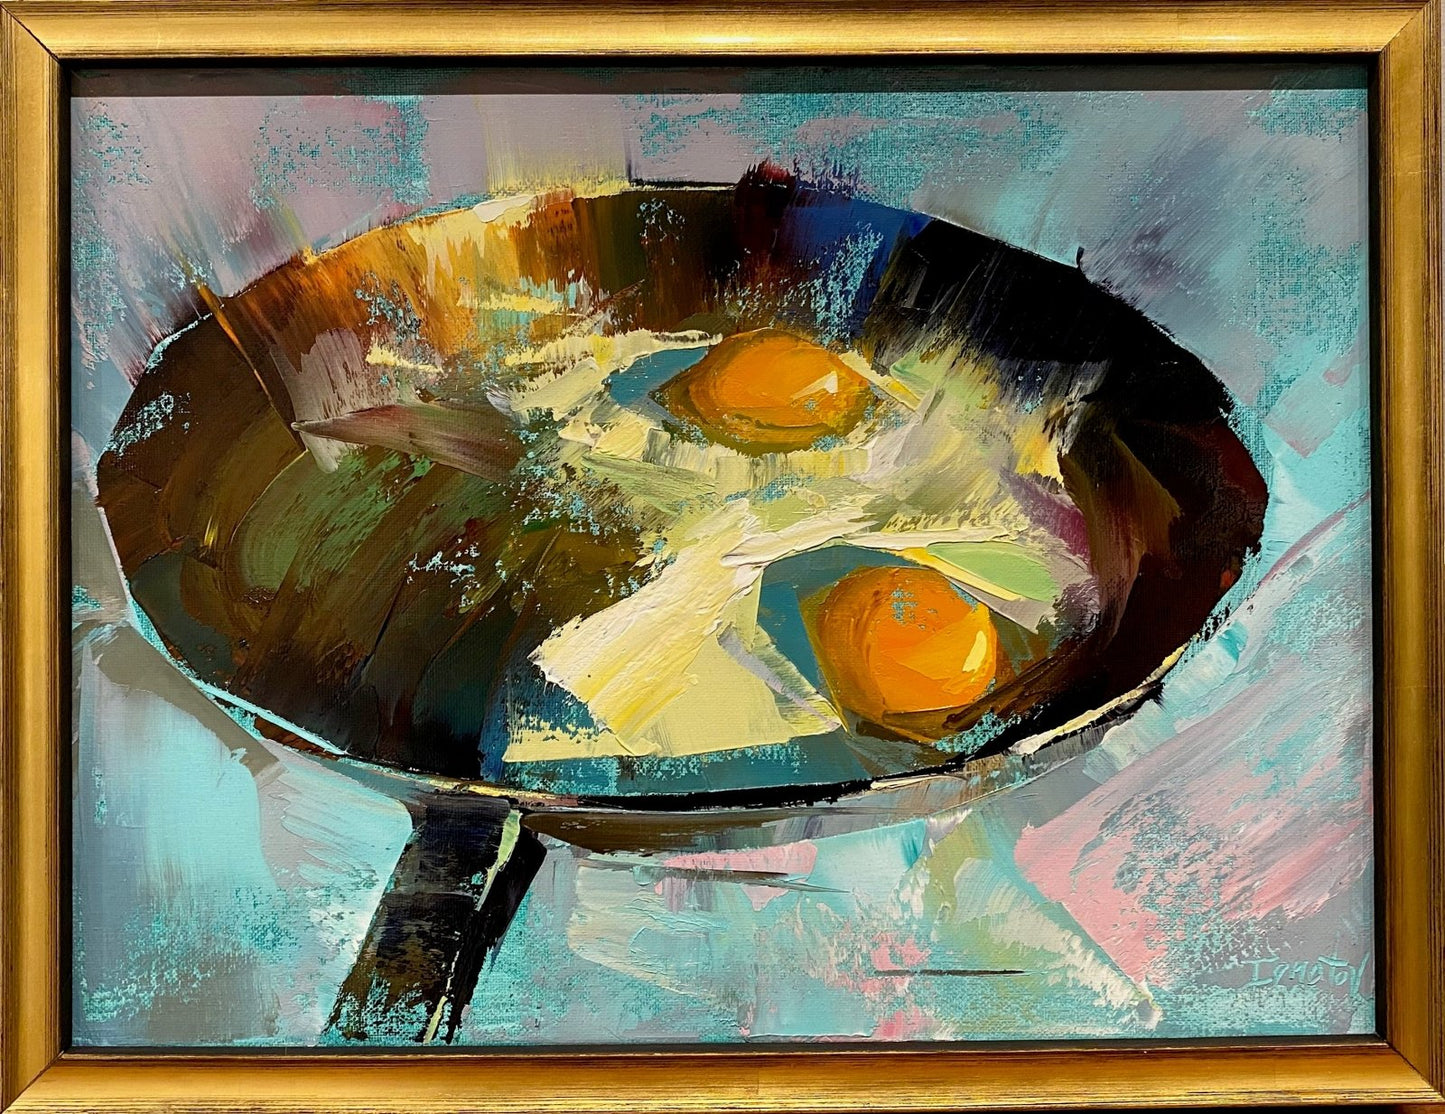 Morning Eggs by Ignat Ignatov at LePrince Galleries